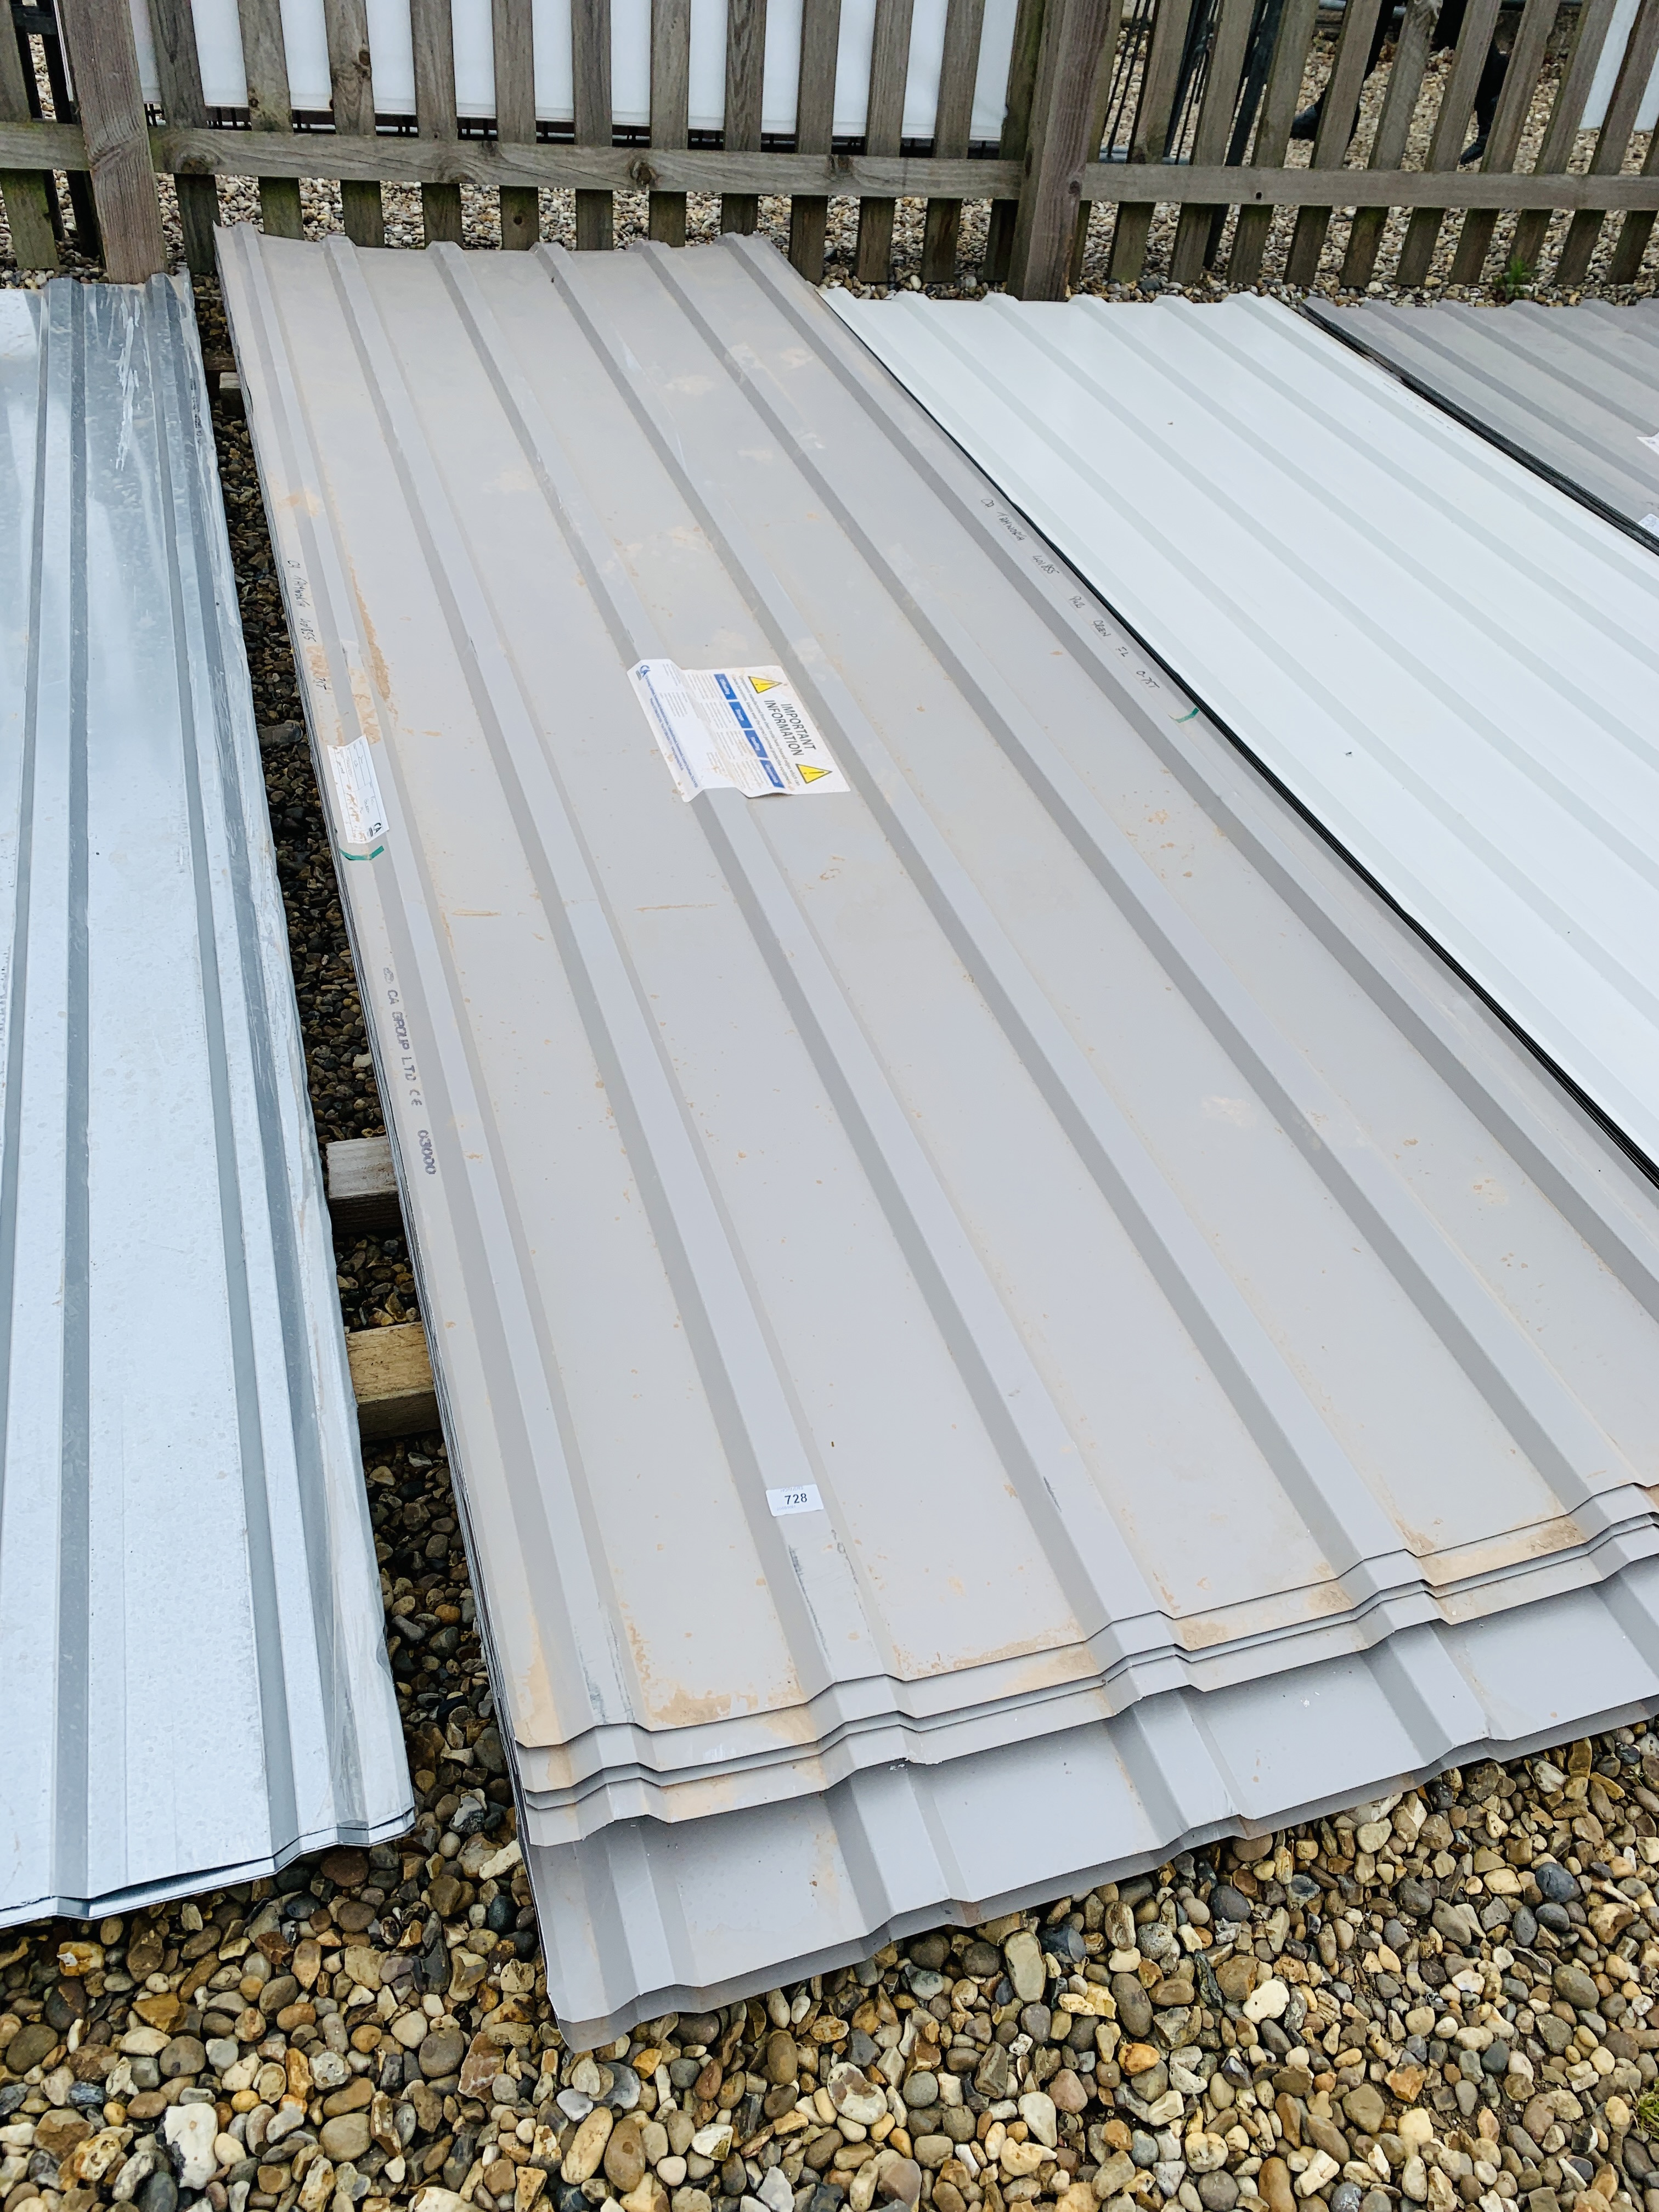 66 X 3M X 1M PROFILE STEEL ROOF LINER SHEETS